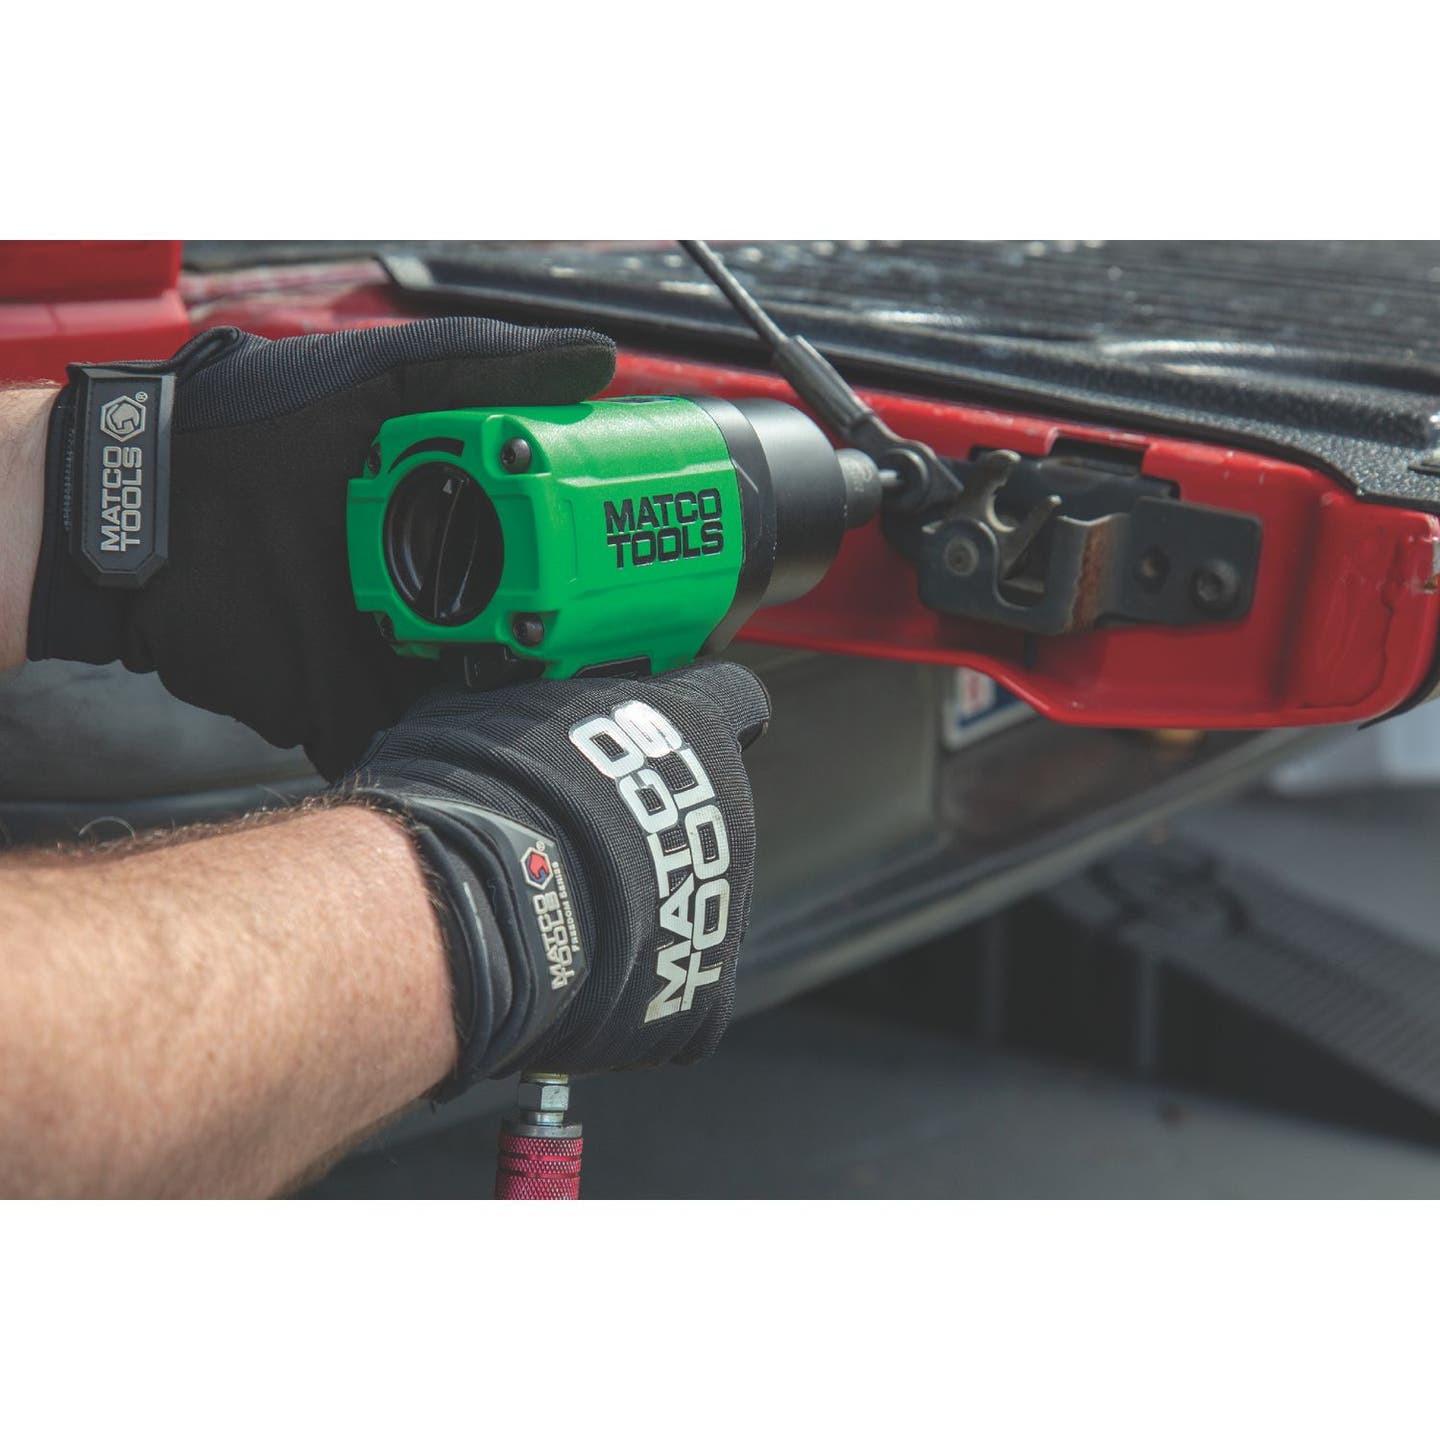 1/2" DRIVE AIR IMPACT WRENCH- GREEN